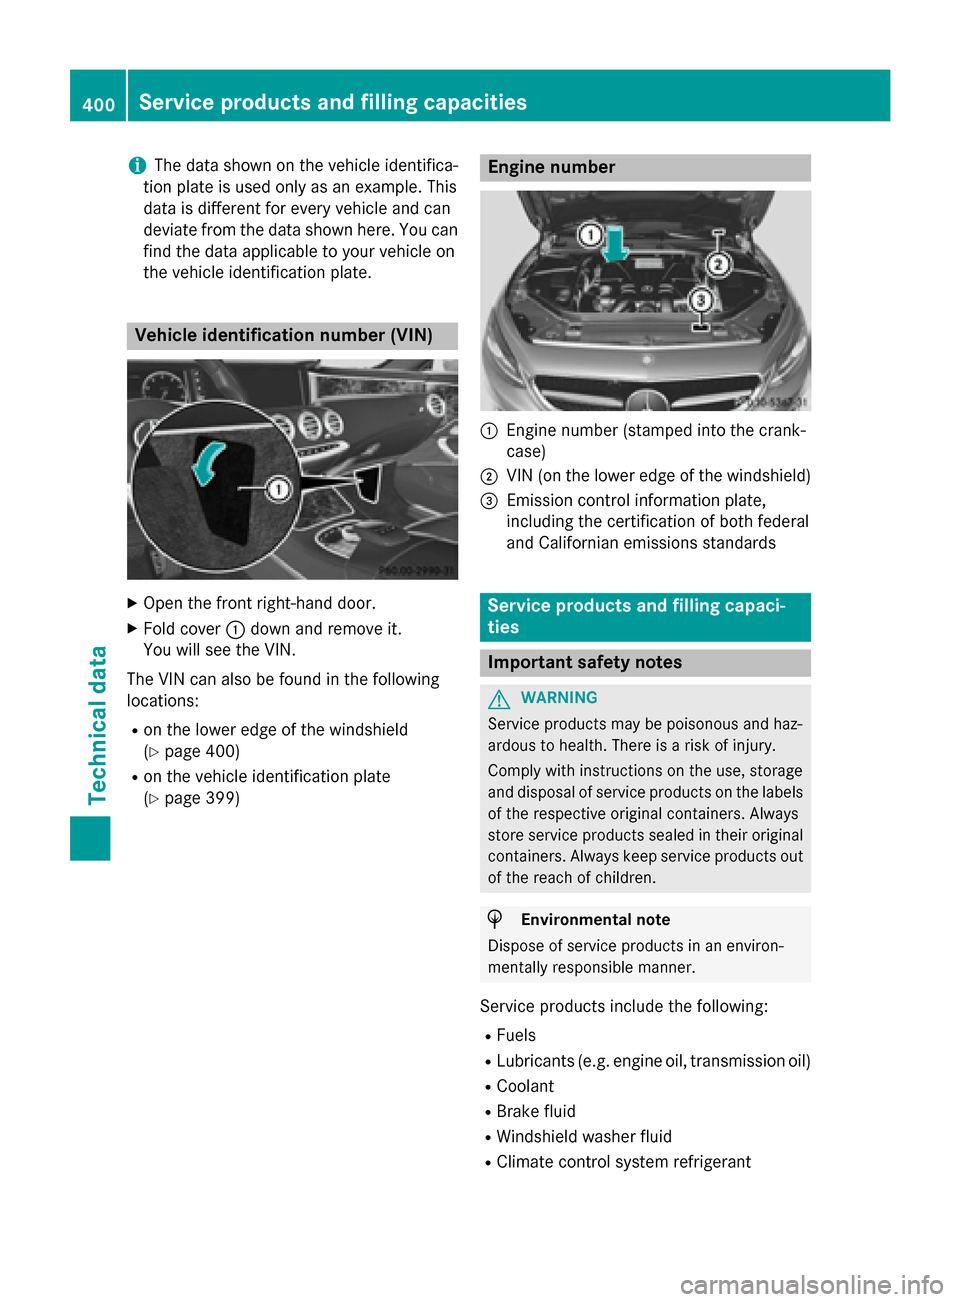 MERCEDES-BENZ S-Class COUPE 2016 C217 Owners Manual iThe data shown on the vehicle identifica-
tion plate is used only as an example. This
data is different for every vehicle and can
deviate from the data shown here. You can
find the data applicable to